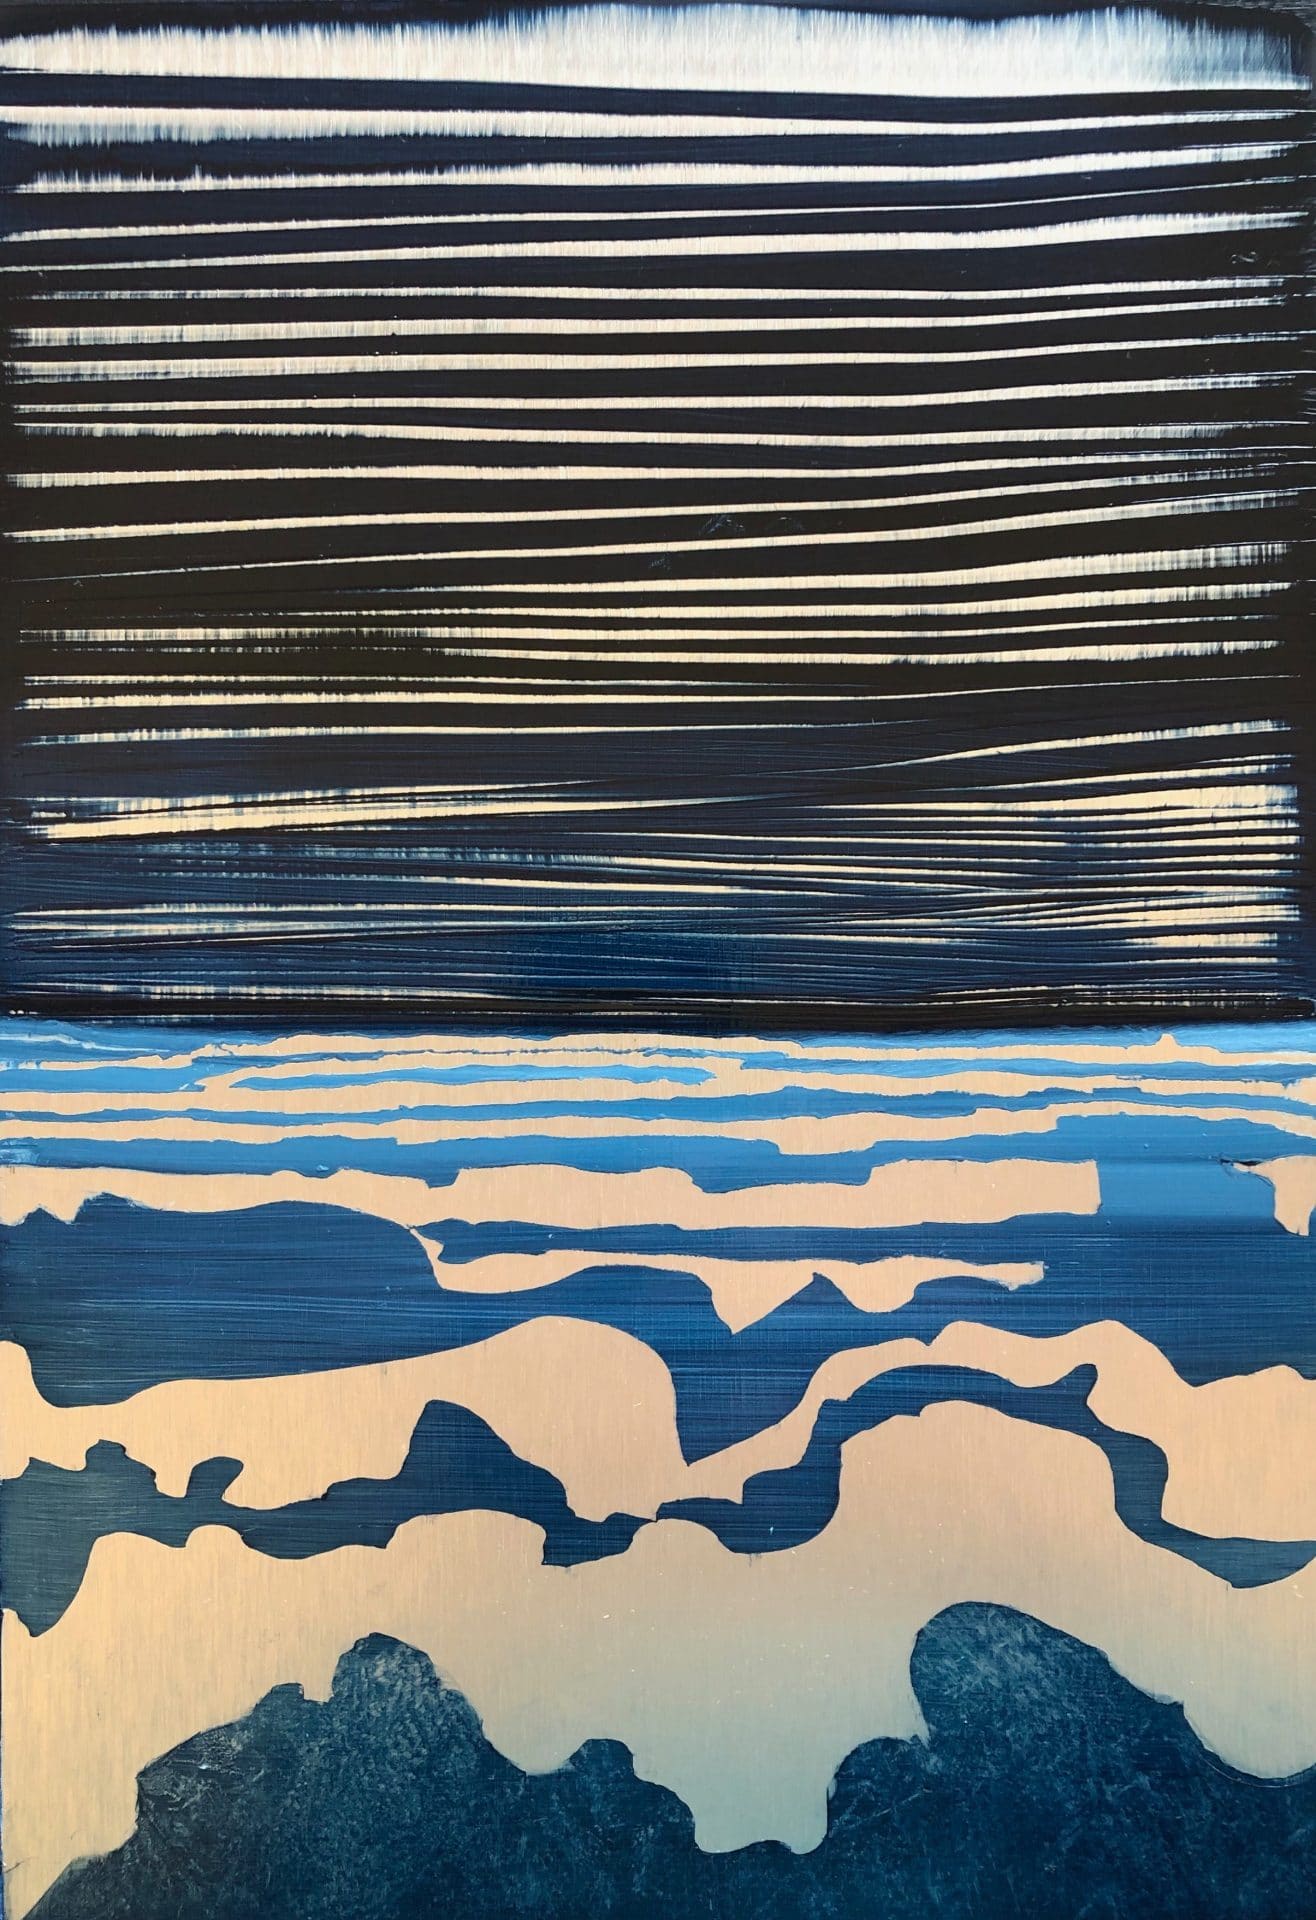 Original oil painting on metal by Cynthia McLoughlin, silver shapes in the foreground layer to the horizon in abstract shapes with a dark, striated sky.